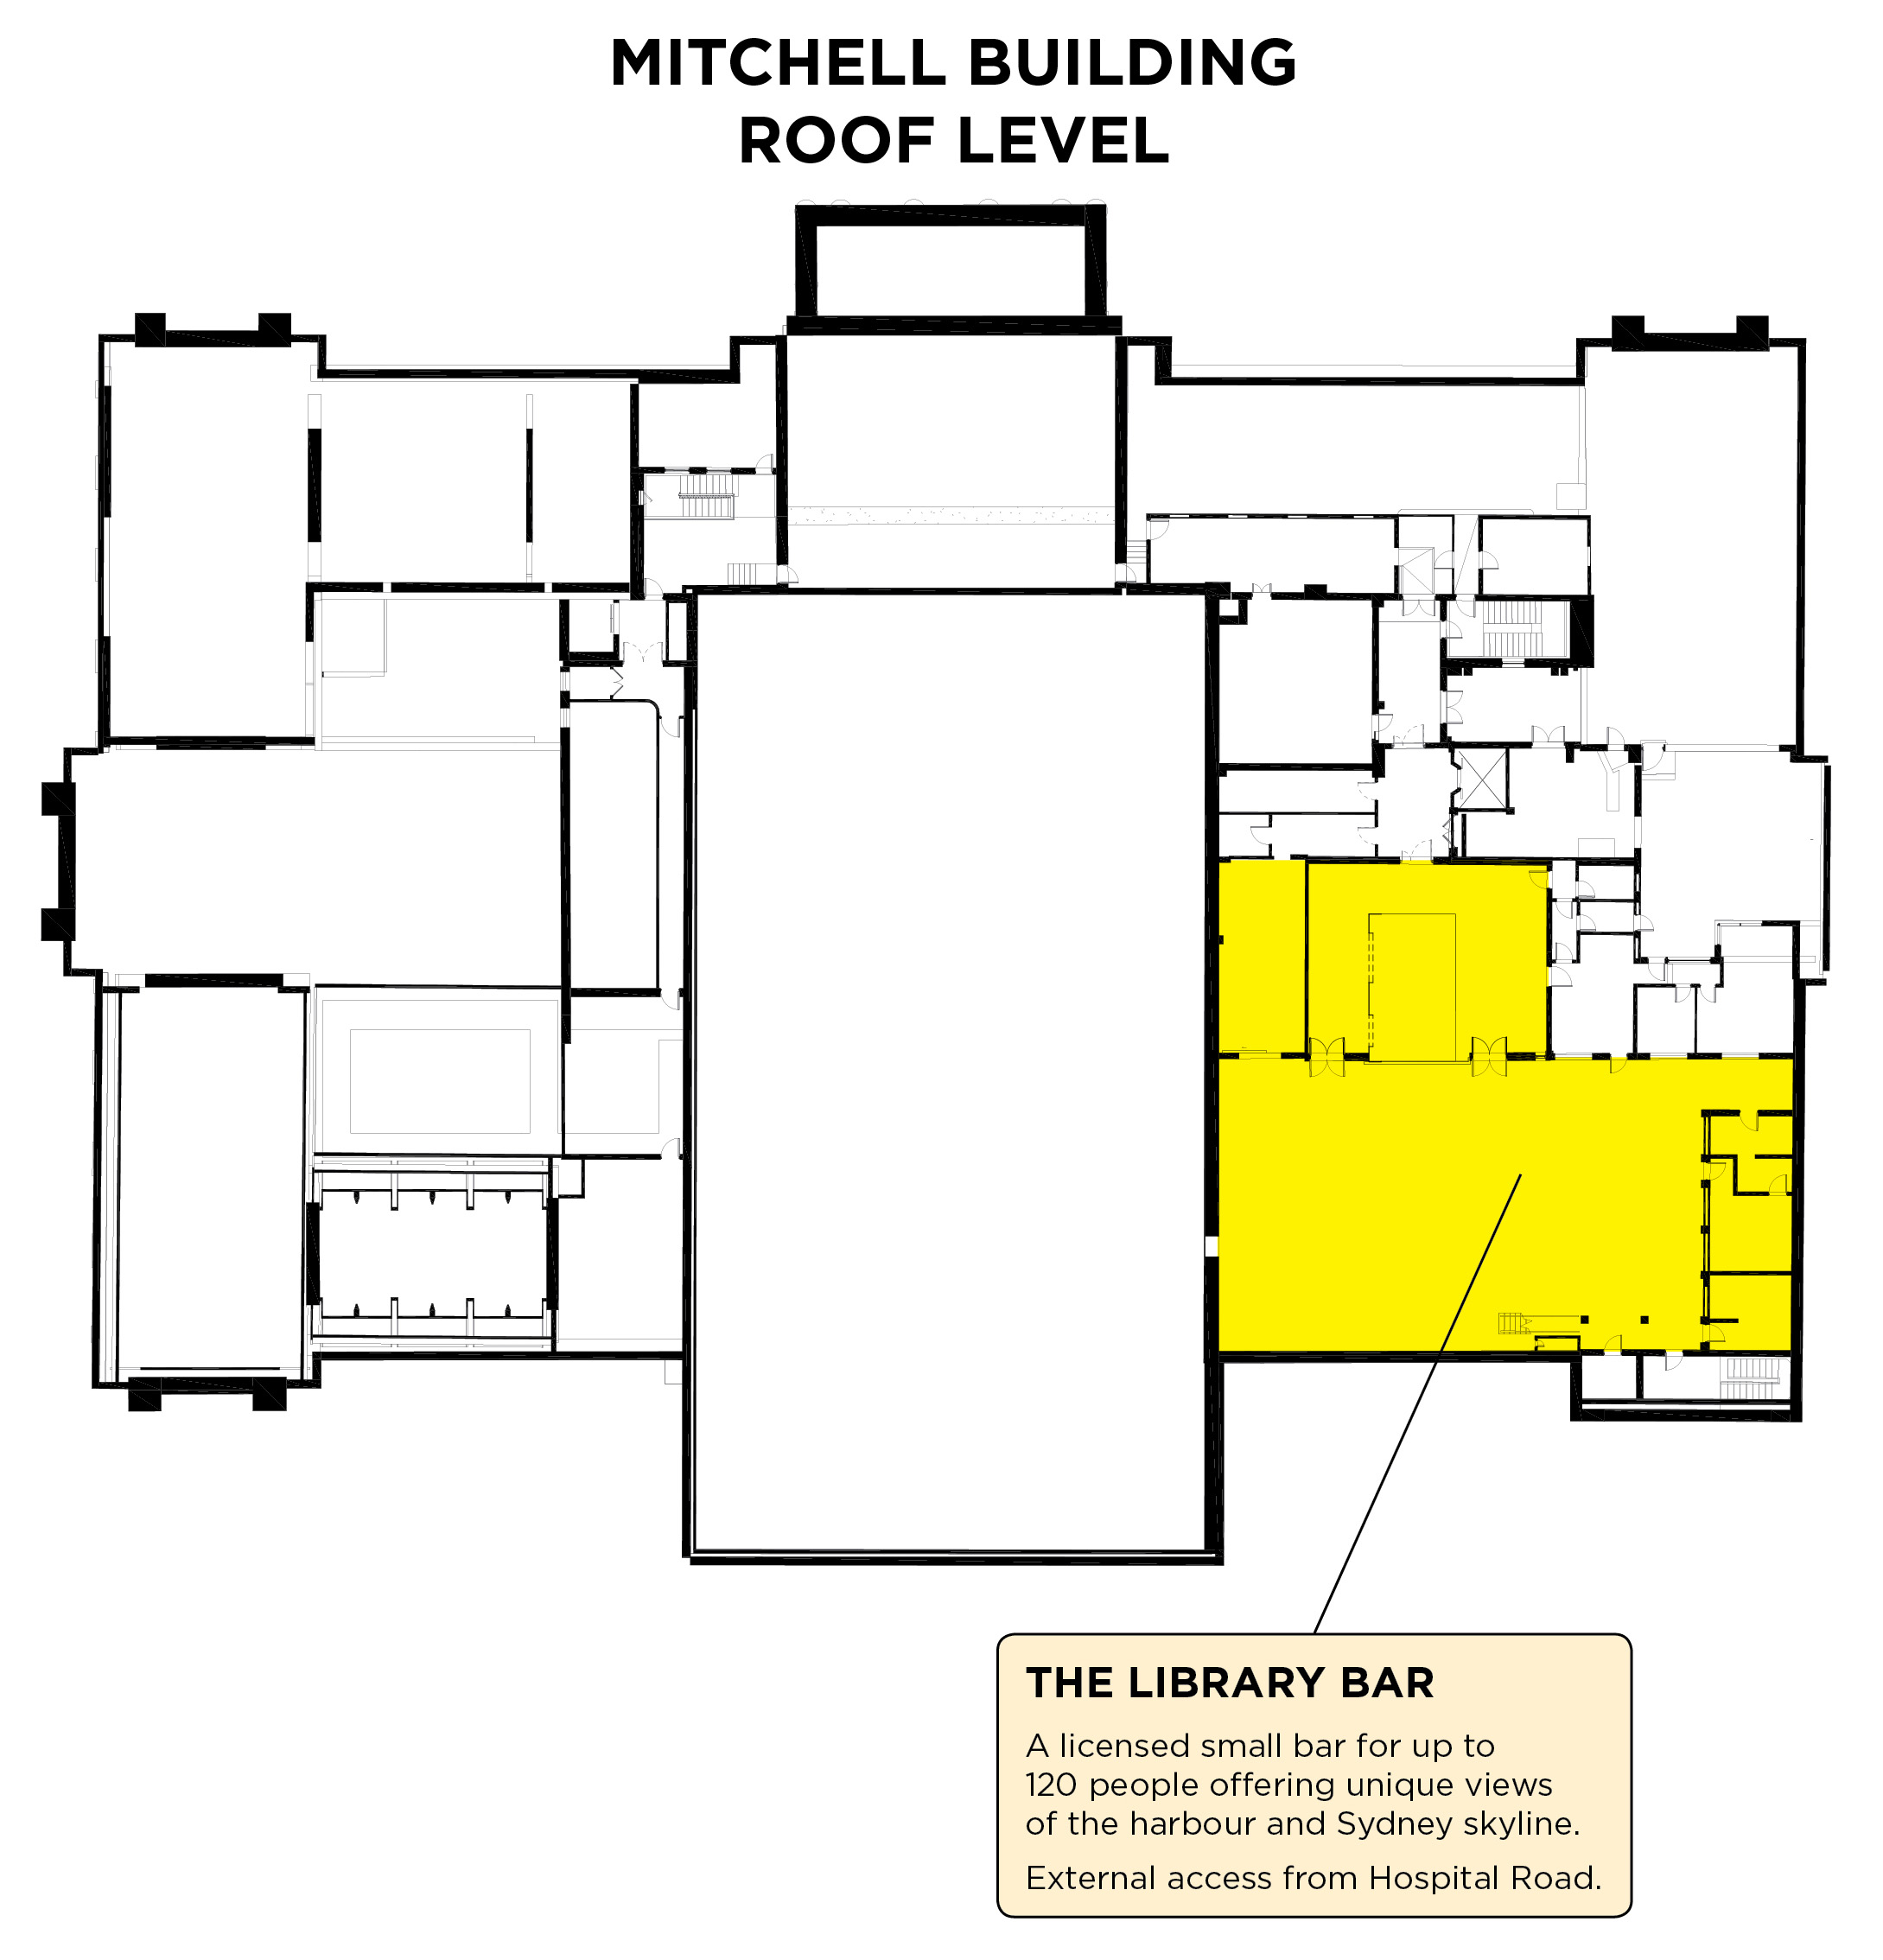 Mitchell Building Lower Roof Level, floor plan